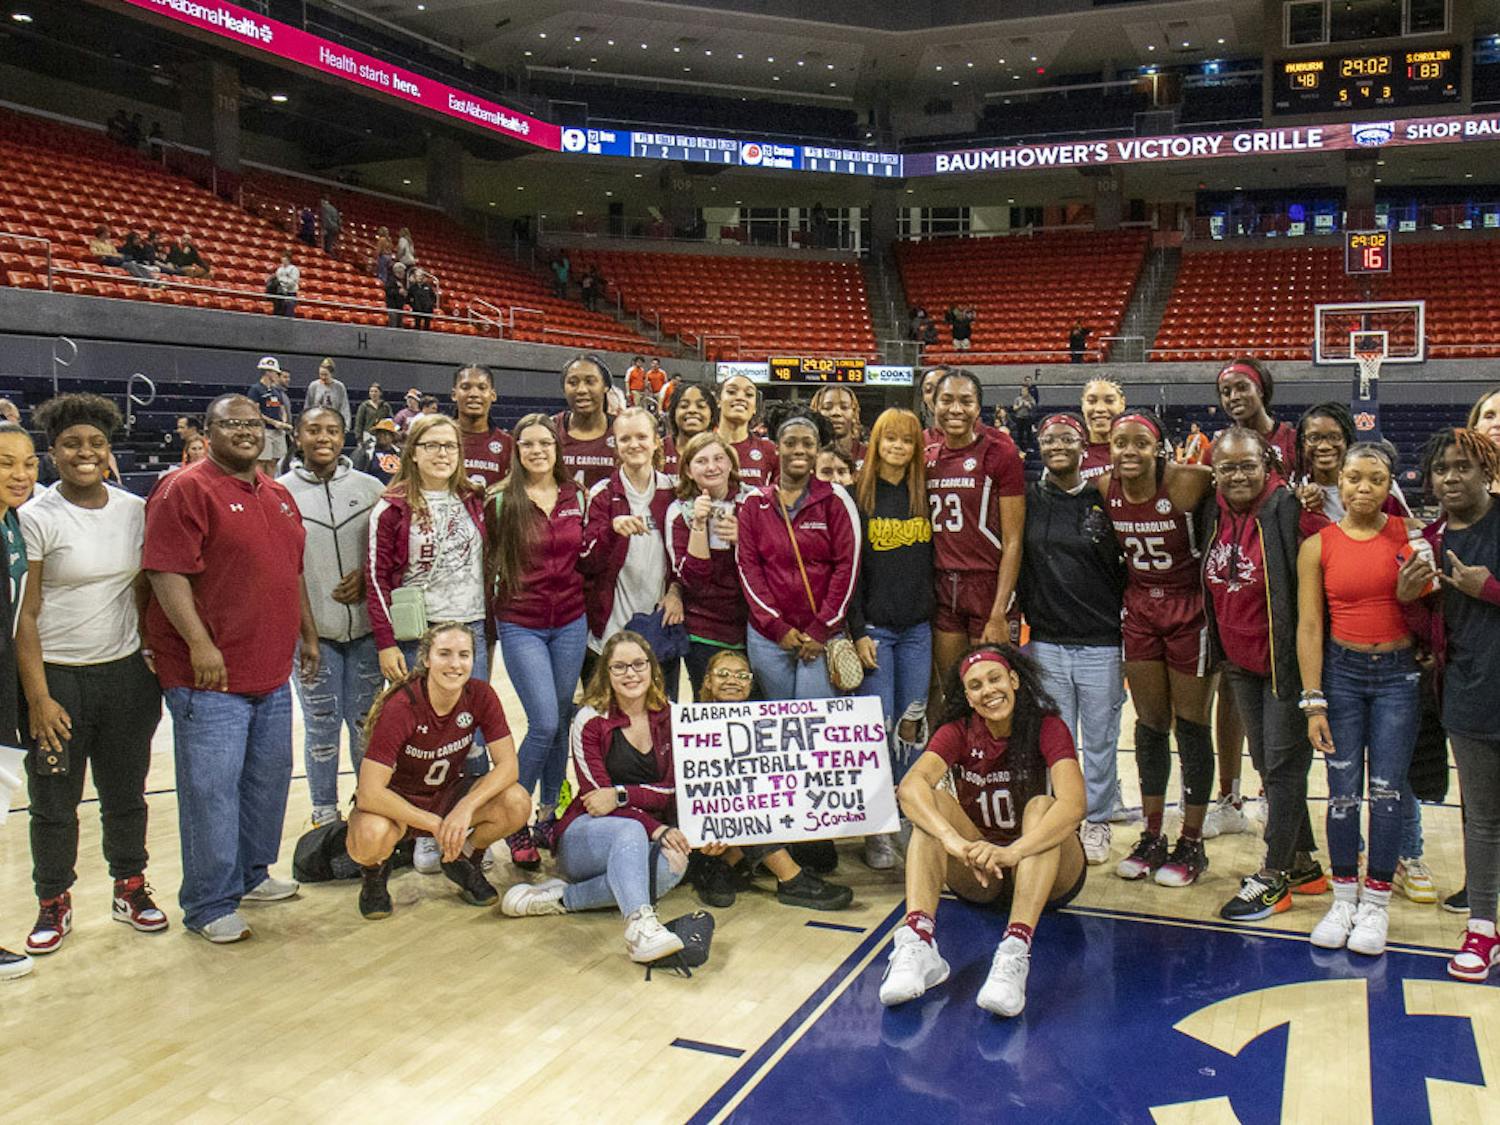 The Alabama School for the Deaf girl's basketball team poses with South Carolina's players, coaches and staff after the matchup against Auburn on Feb. 9, 2023. The Gamecocks beat the Tigers 83-48.&nbsp;